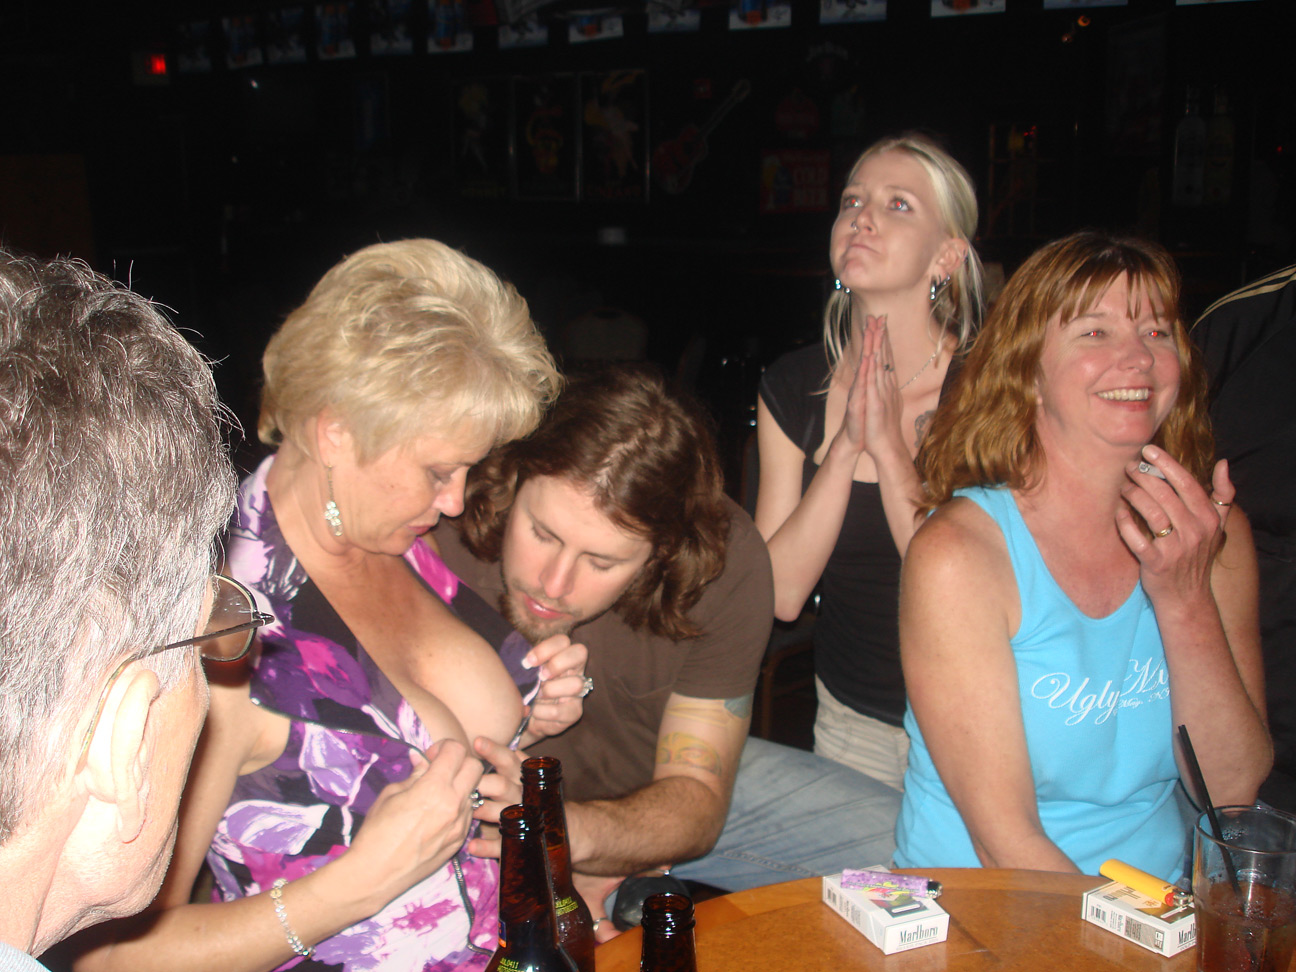 Real Tampa Swingers Orgy - Our Real Tampa Swingers Monthly Bar Meet And Greet